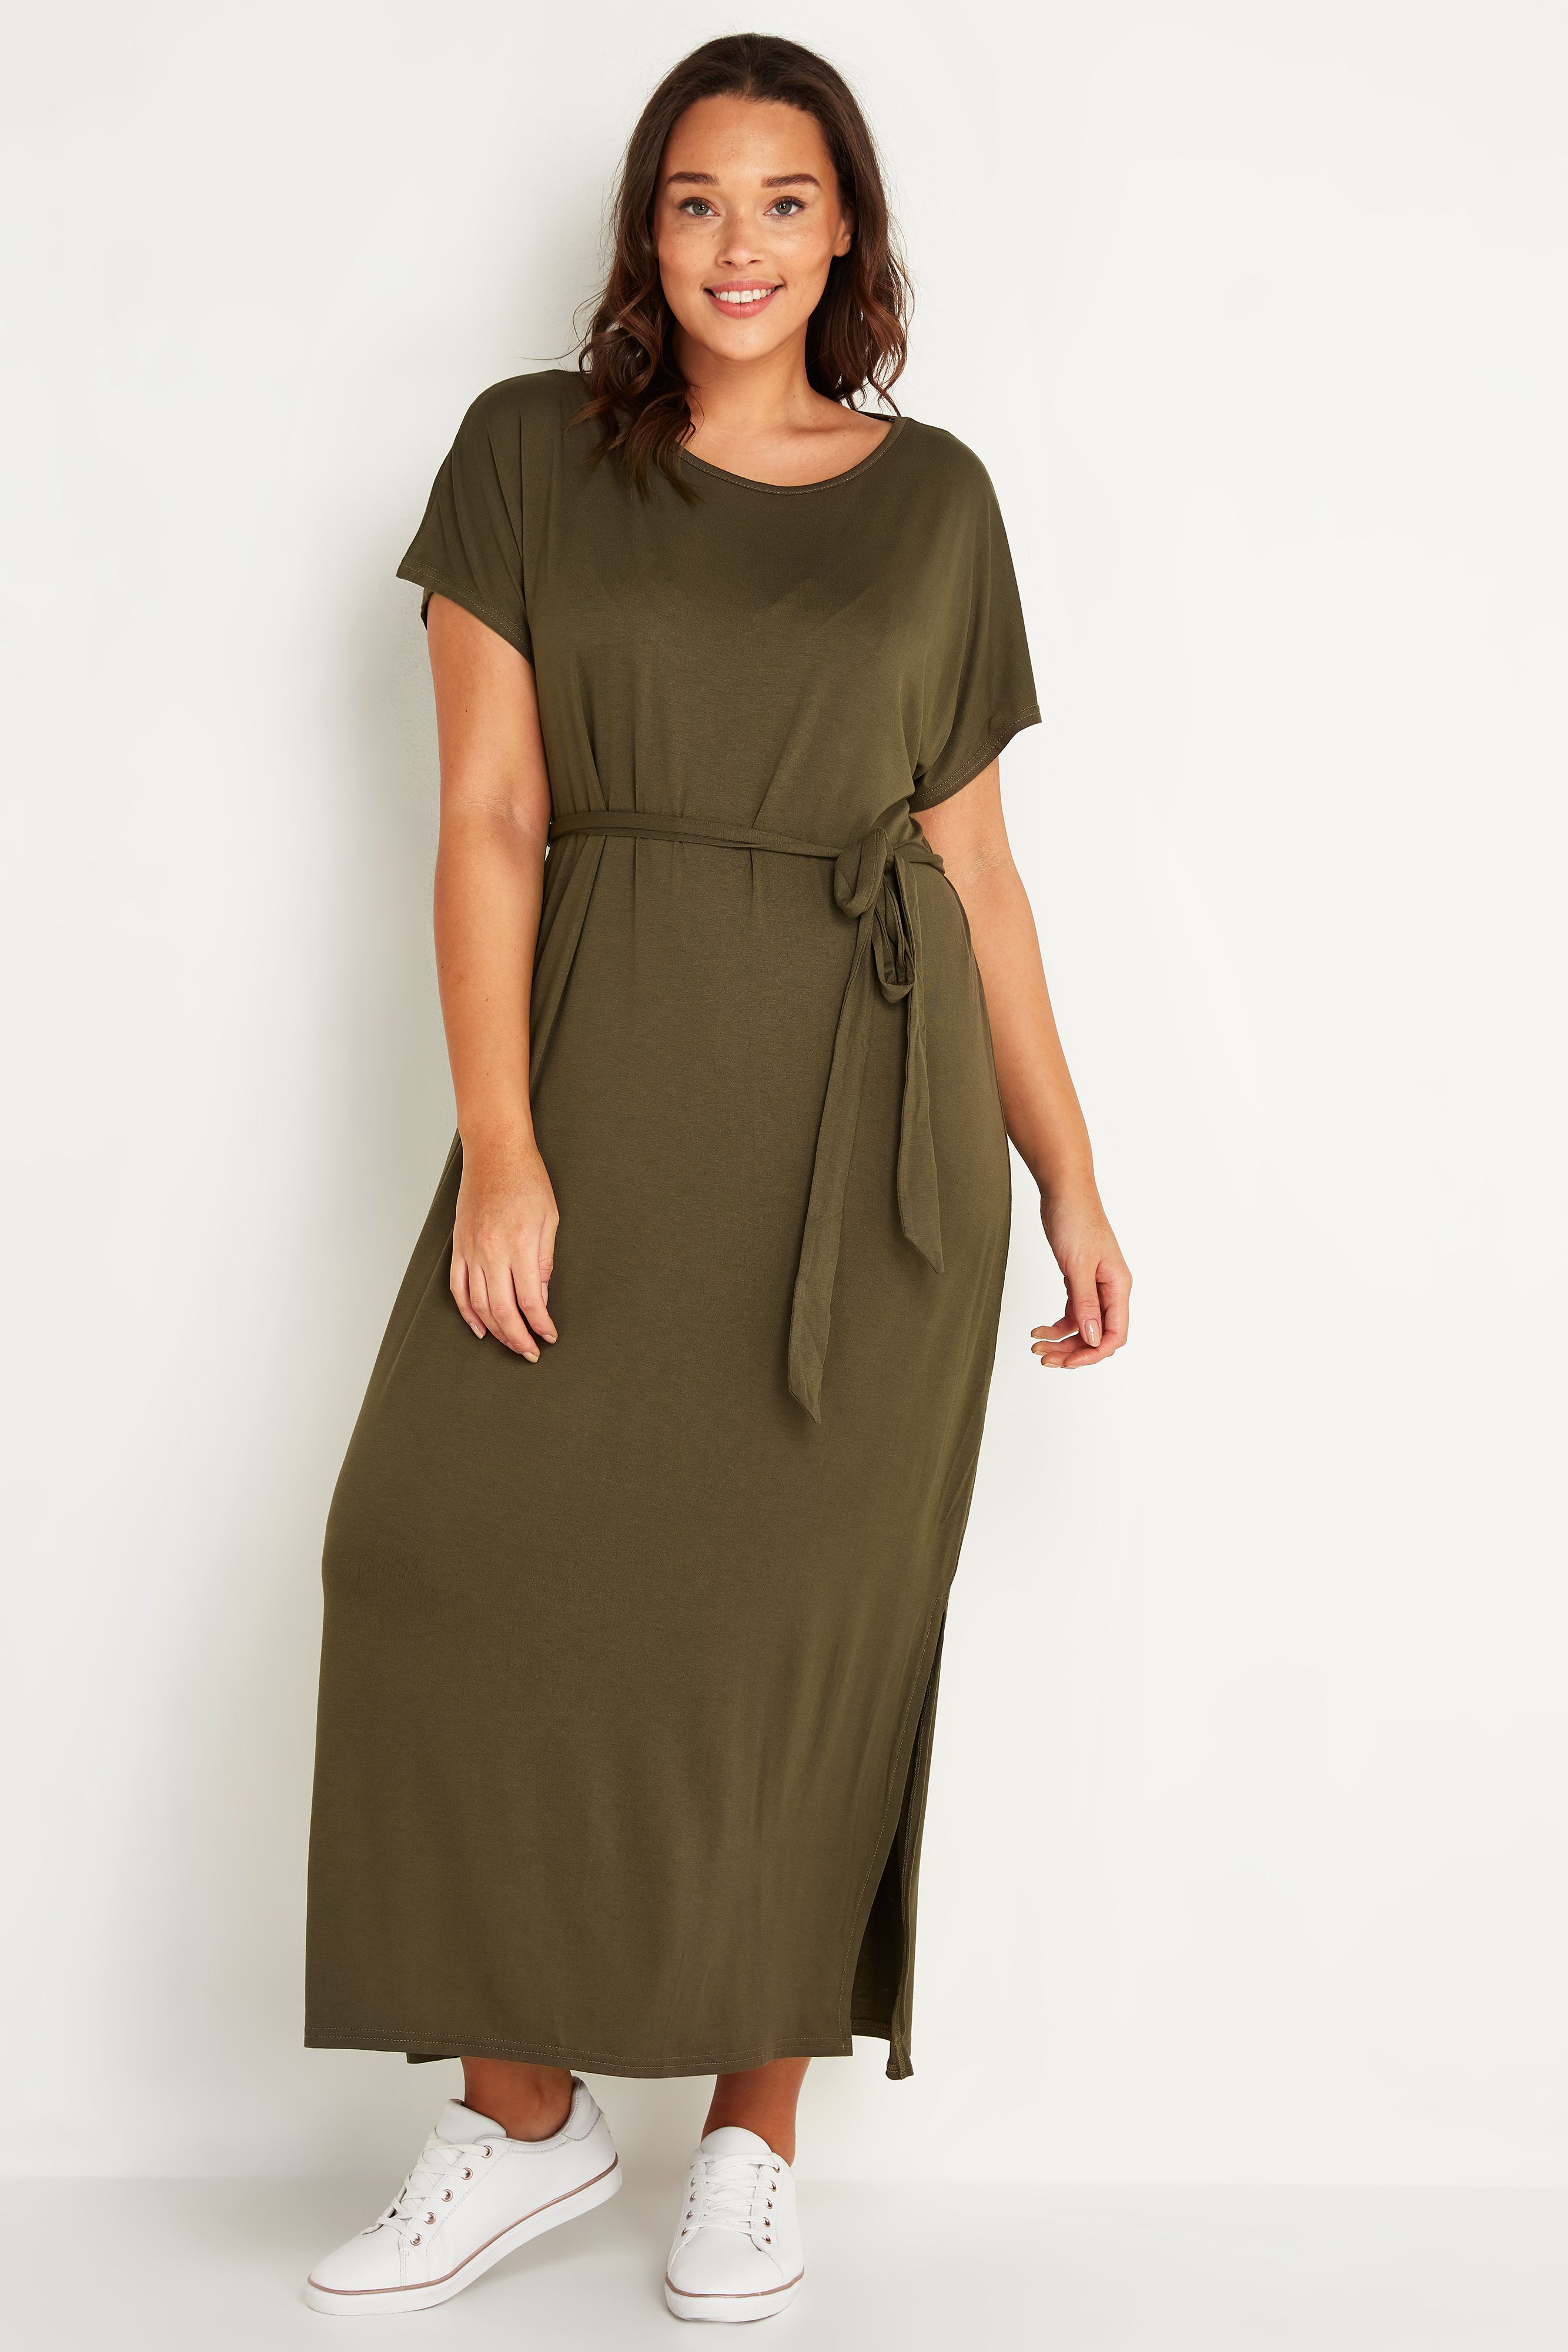 Perfect your off-duty style in the oh-so-comfortable Maxi T-Shirt Dress. Flaunting a tie waist and classic t-shirt silhouette, this casual dress is a must-have in every woman's wardrobe. Key Features Include: - Crew neckline - Short sleeves - Tie waist - Relaxed fit - Maxi length hemline with side split